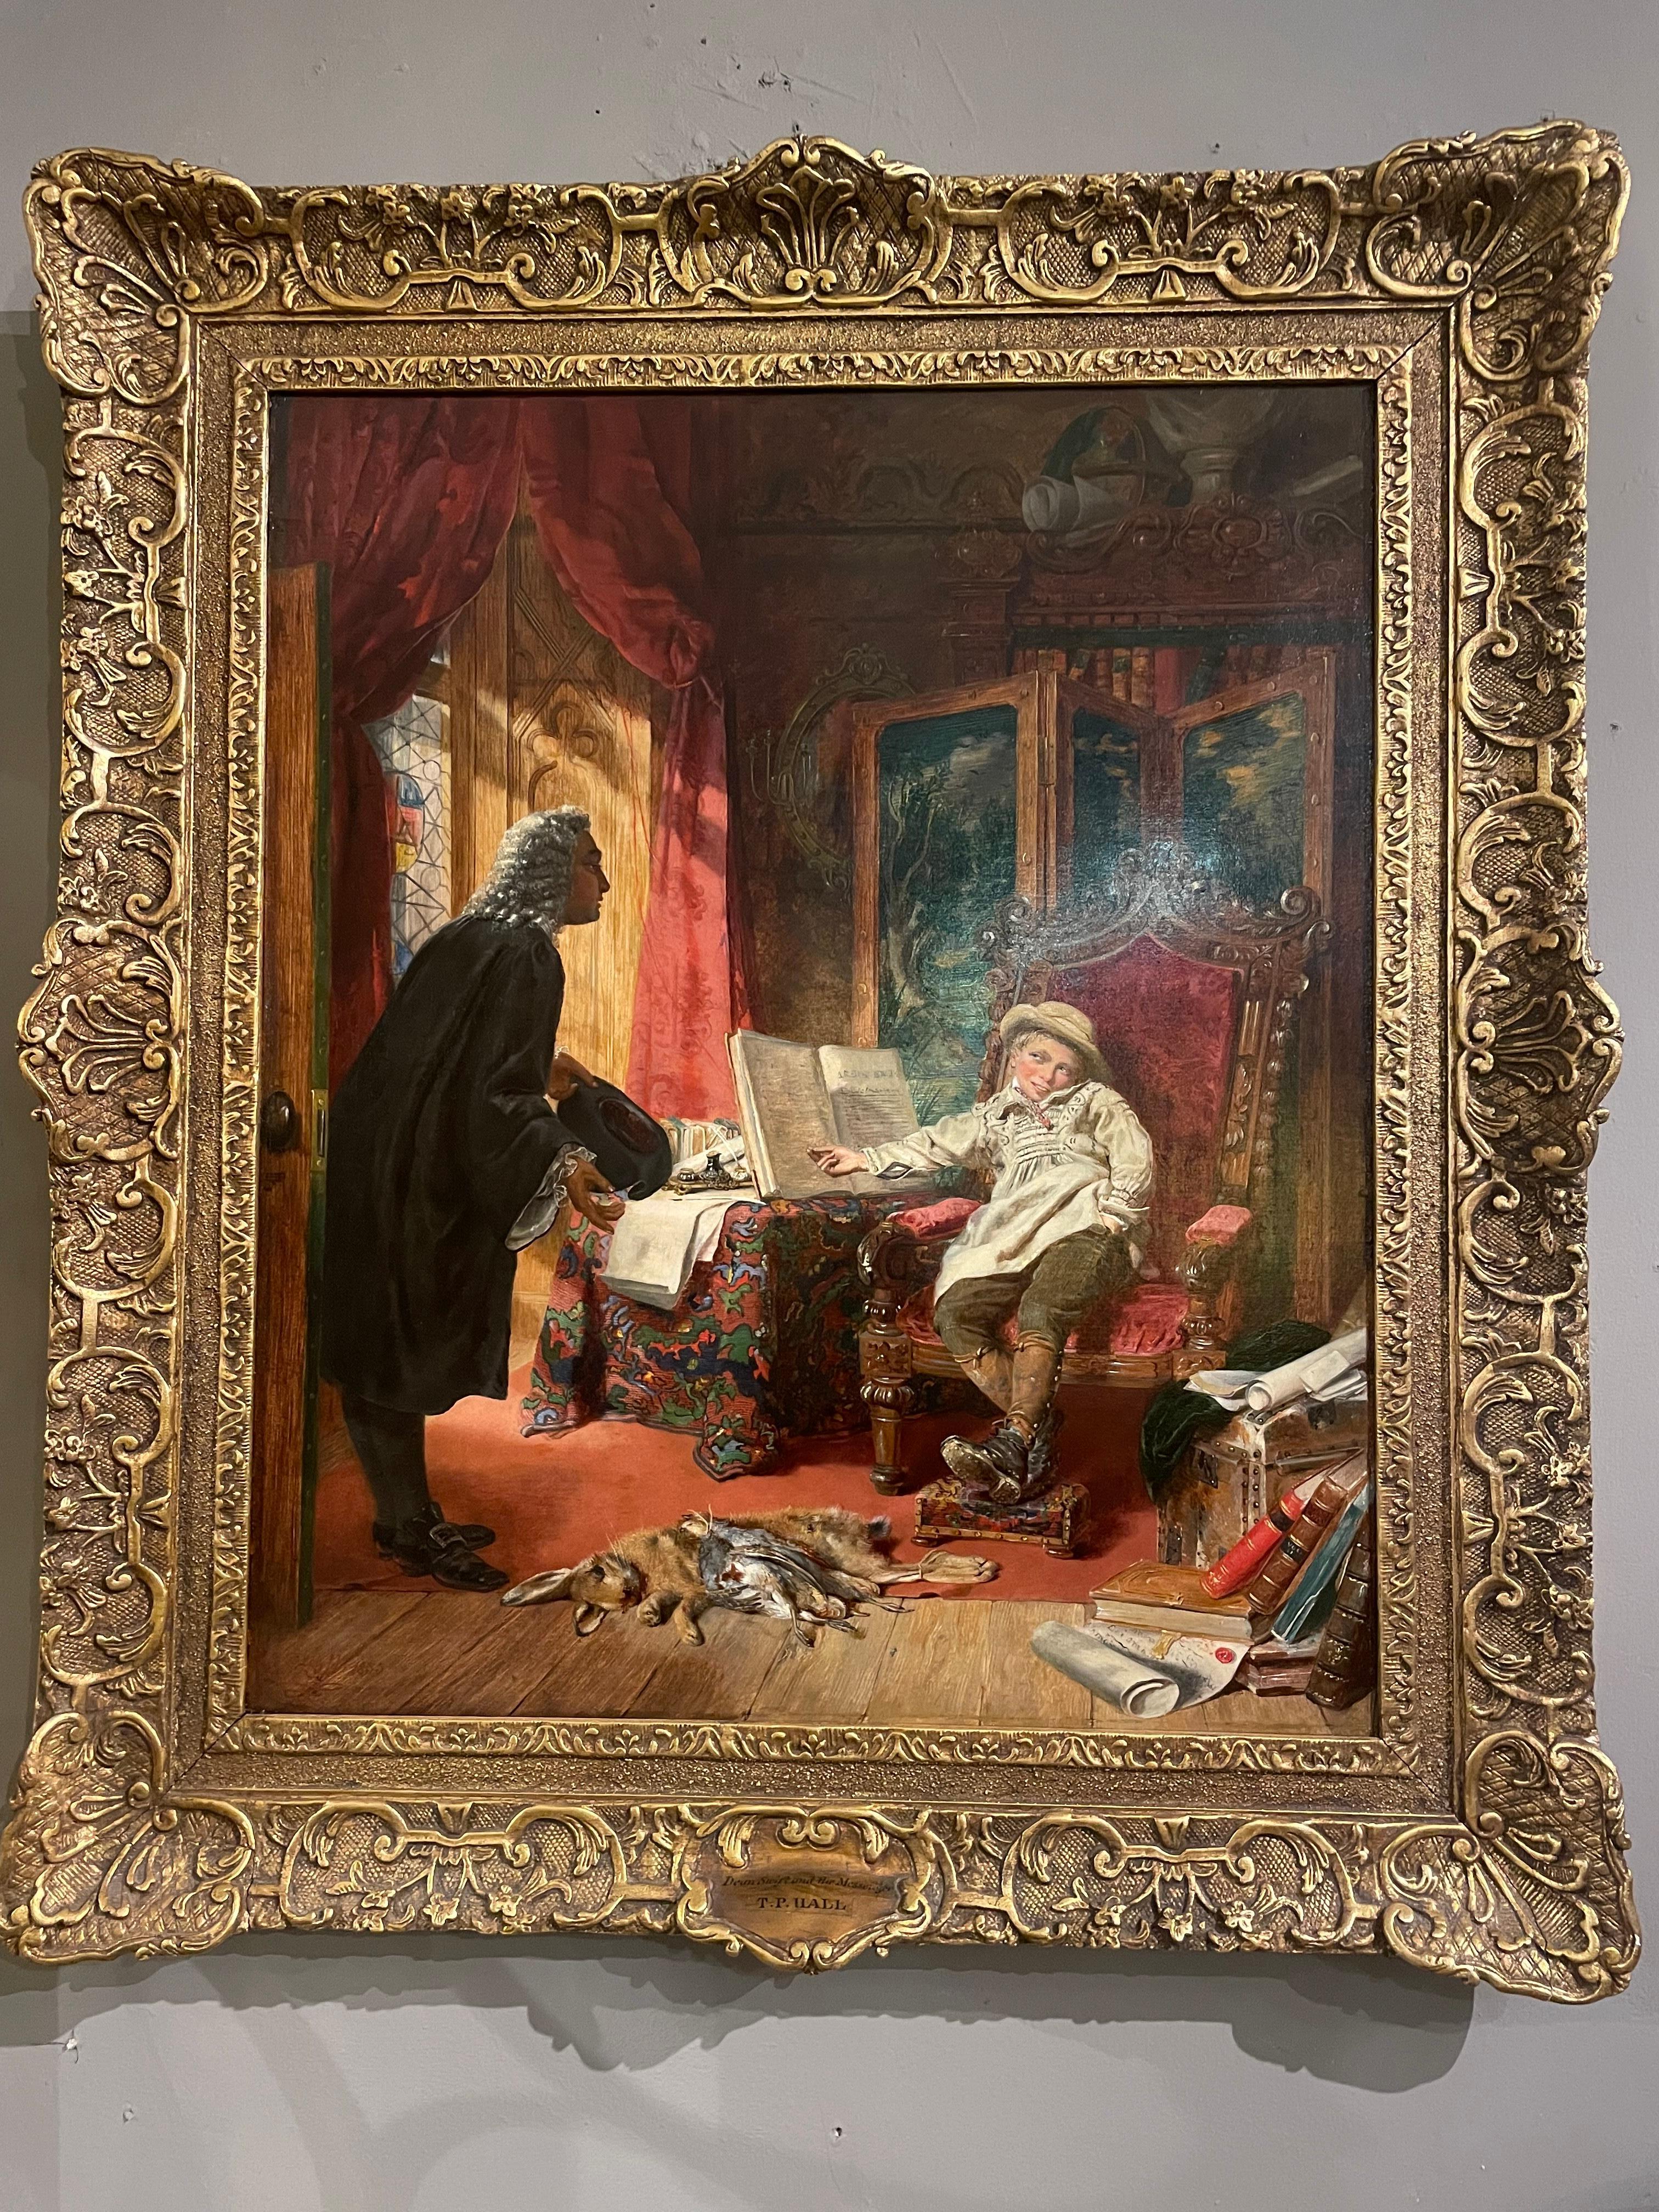 English 19th Century Oil On Canvas Titled ‘Dean Swift & The Young Merchant’ By T.P. Hall For Sale